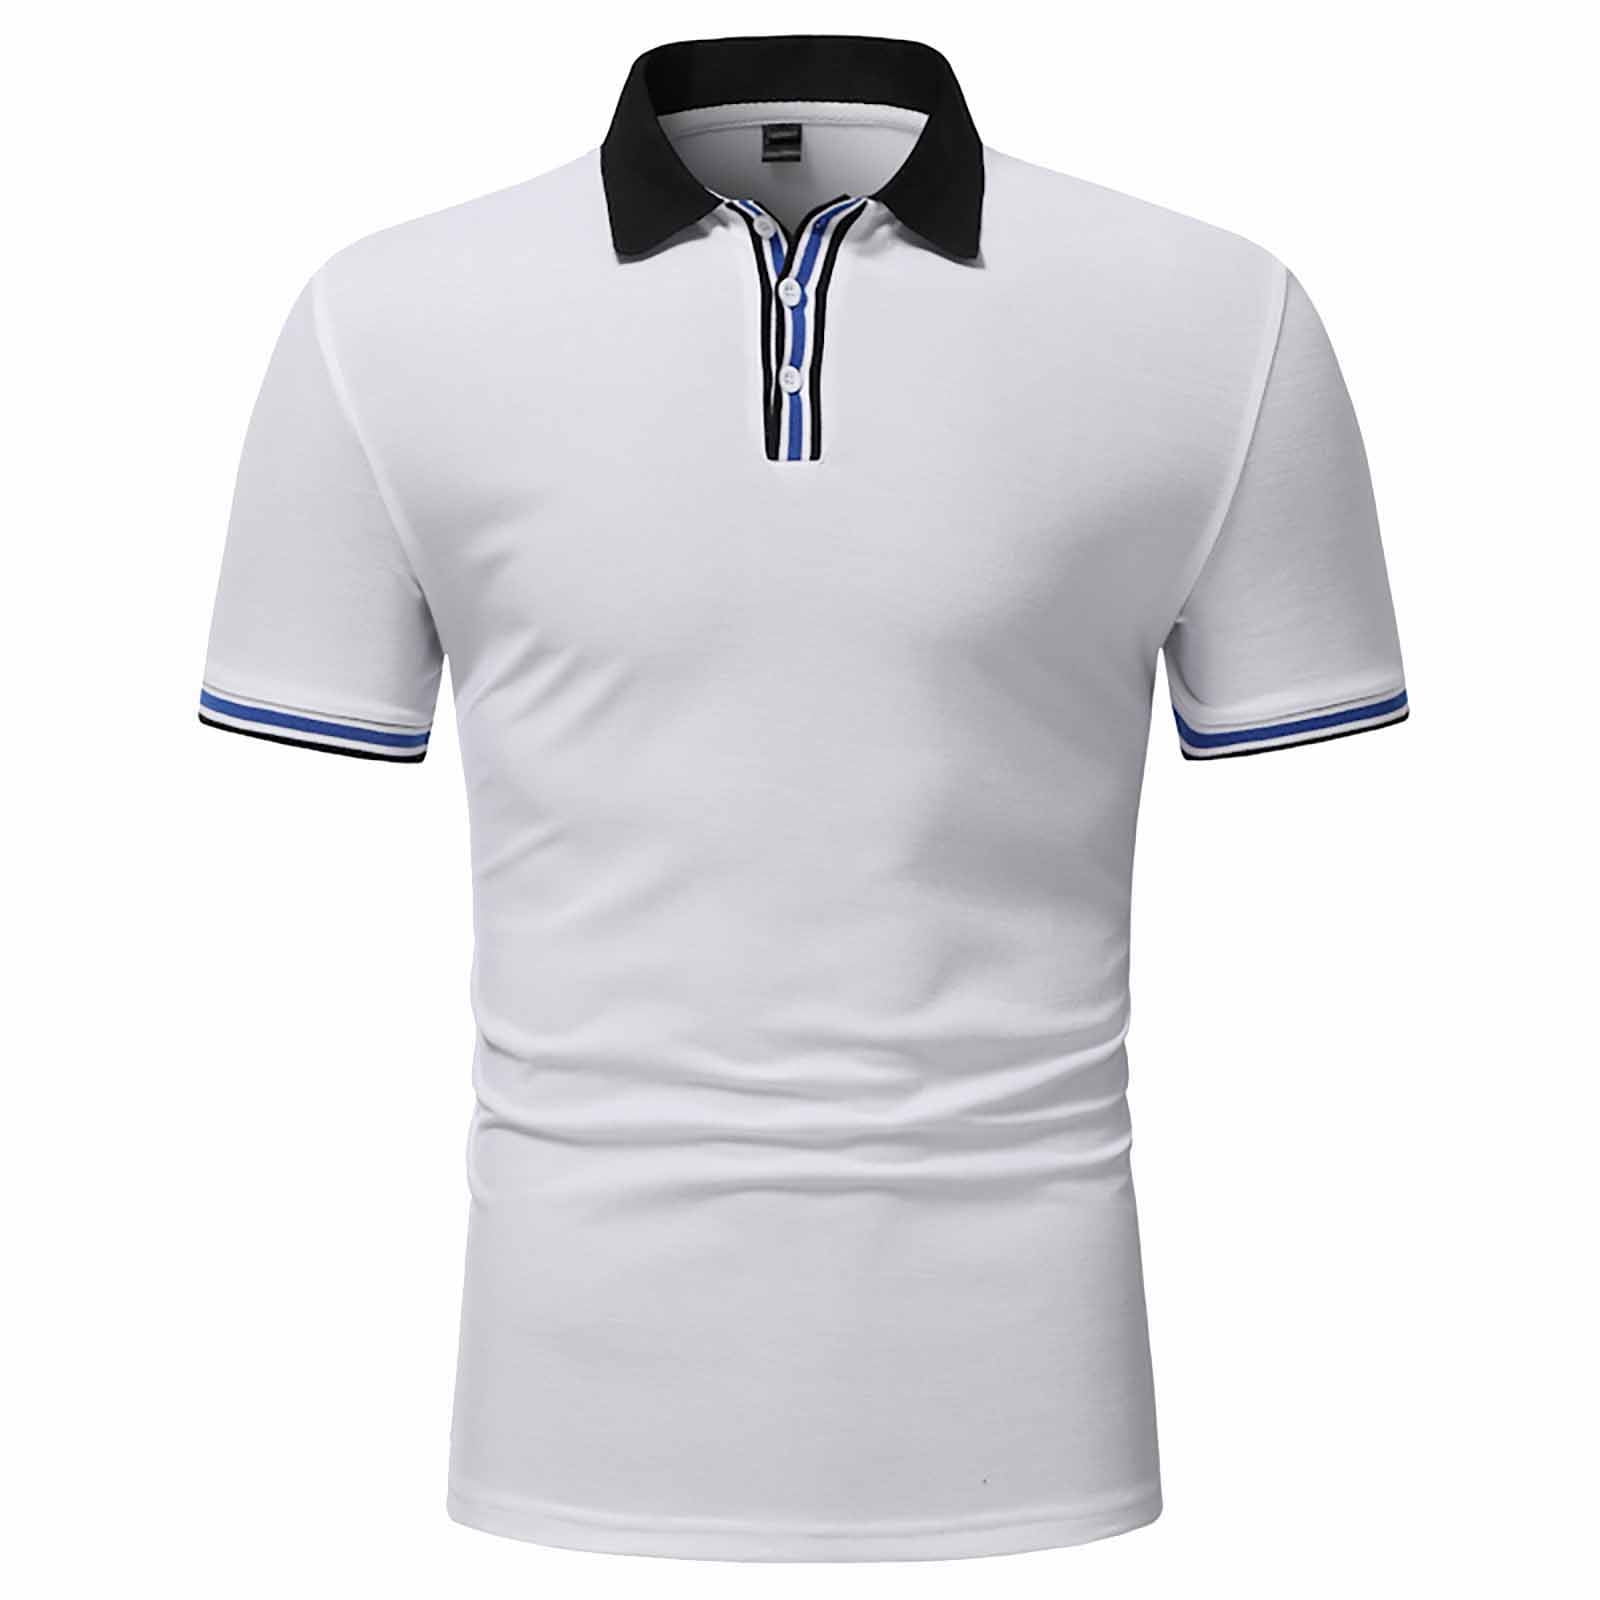 Zodggu Rollback Slim Fit Casual Regular Polo Shirts for Men Tops